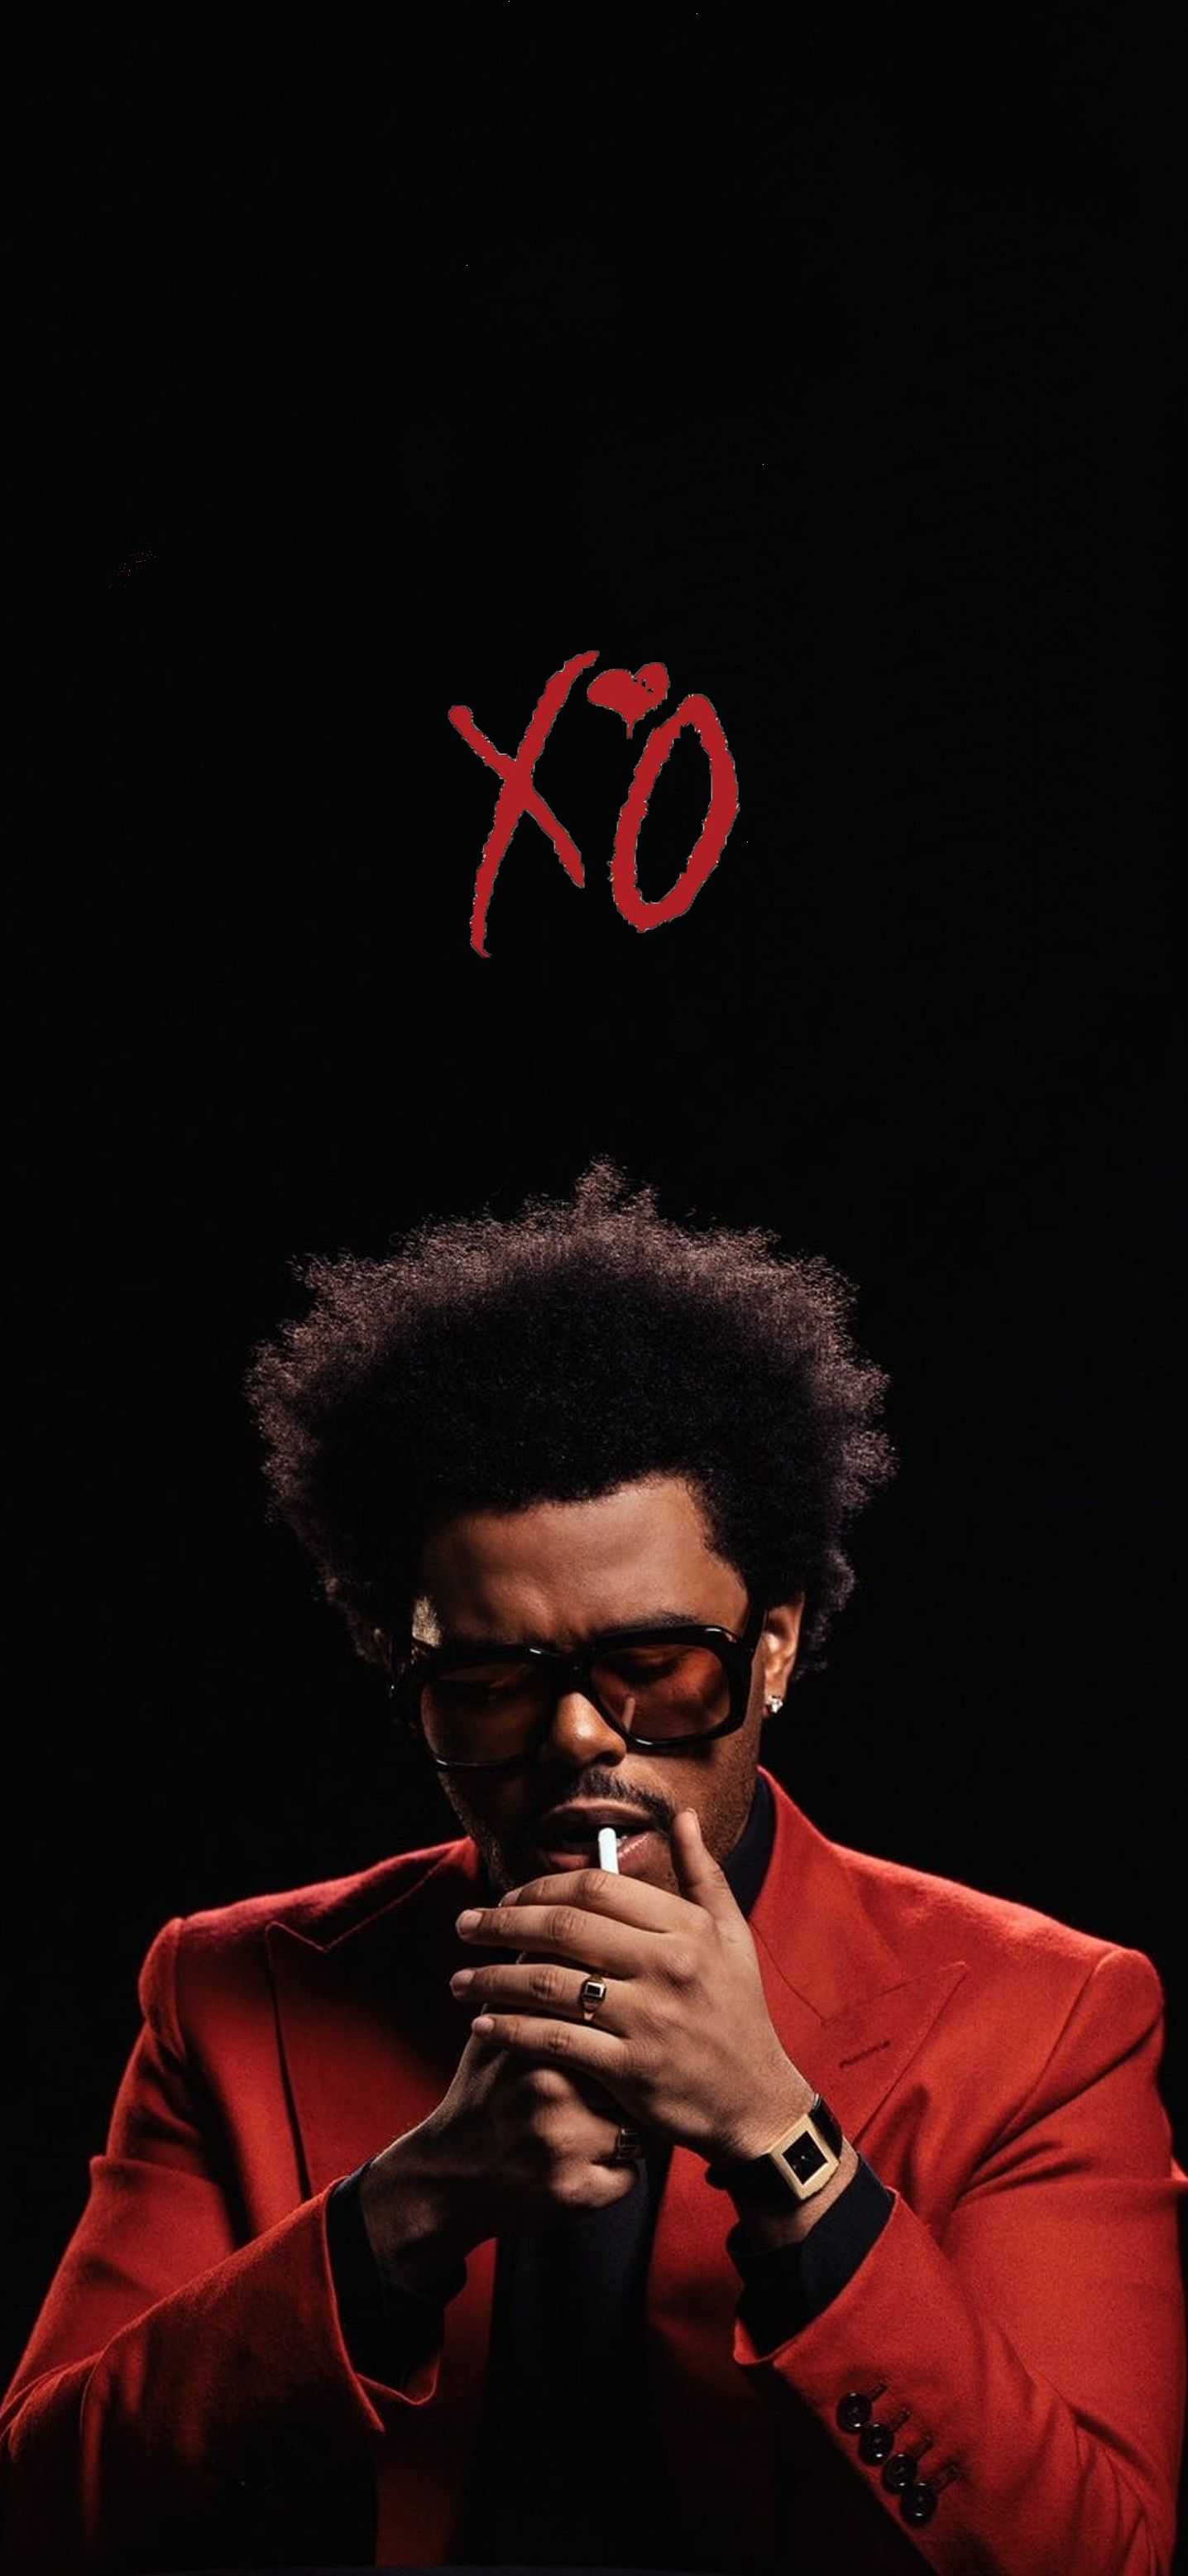 The Weeknd wallpaper for iPhone and Android devices - The Weeknd